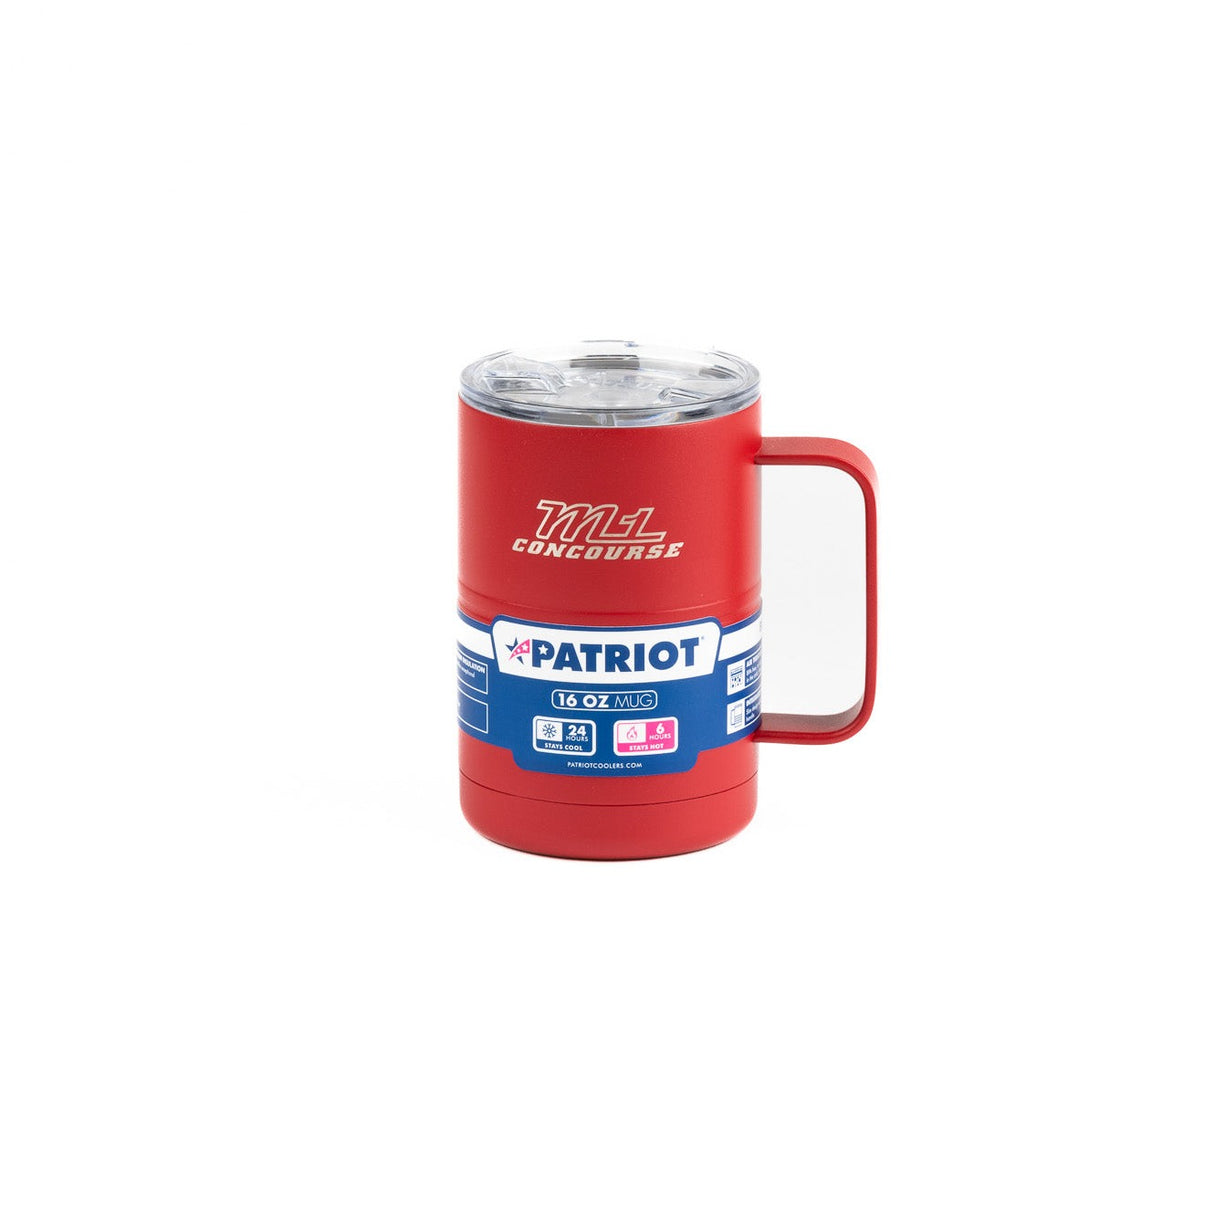 Patriot Red Thermal Mug with M1 Concourse Logo - 16 oz